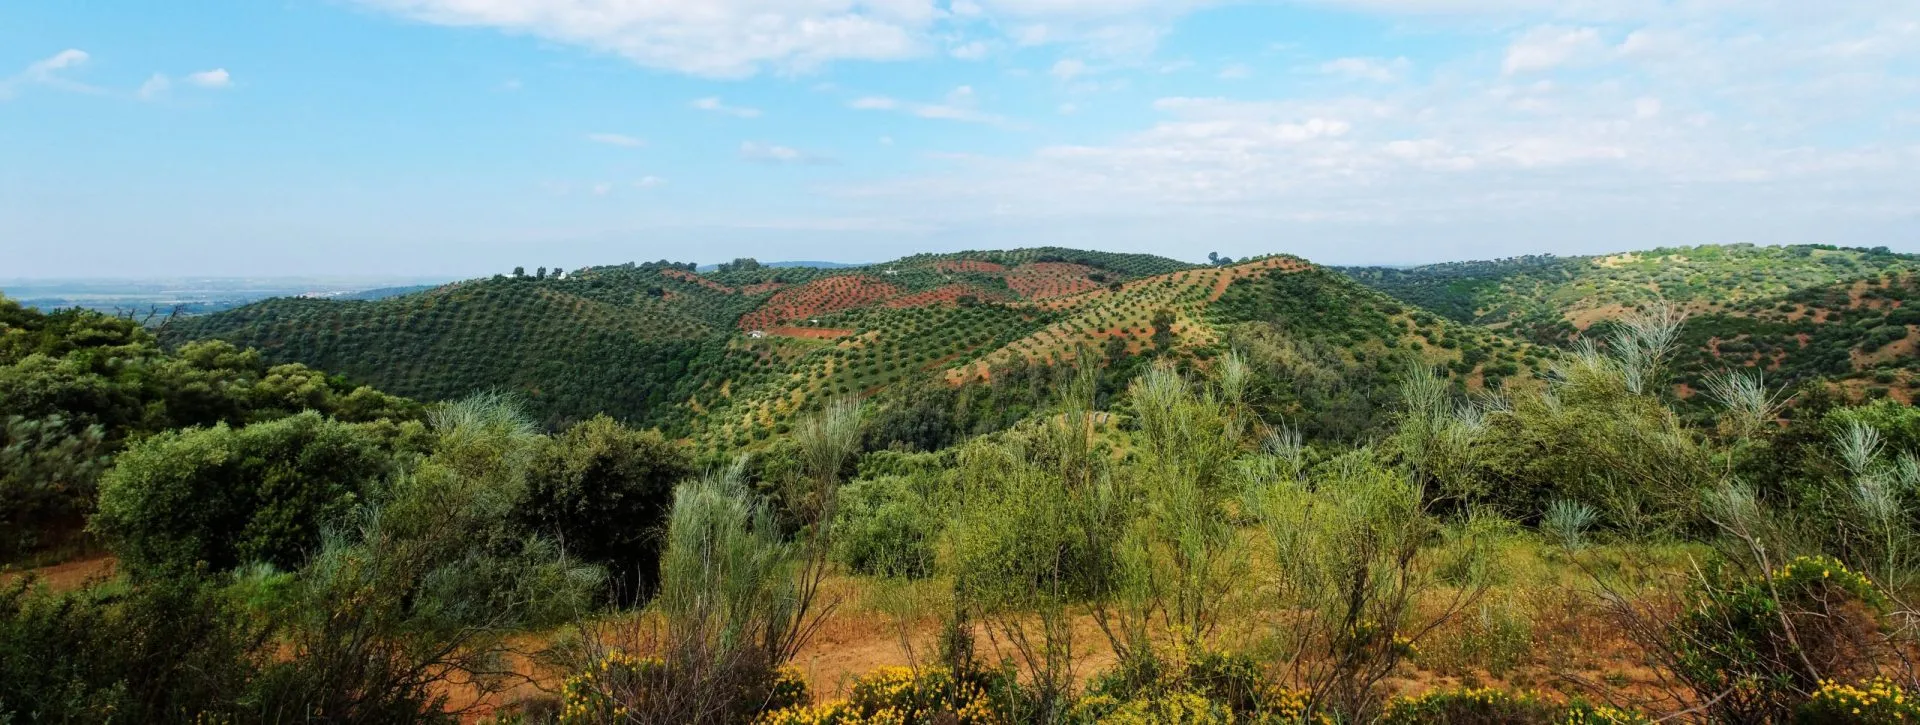 Picturesque Mediterranean landscape with hills covered with olive trees near La Brena reservoir in Spain